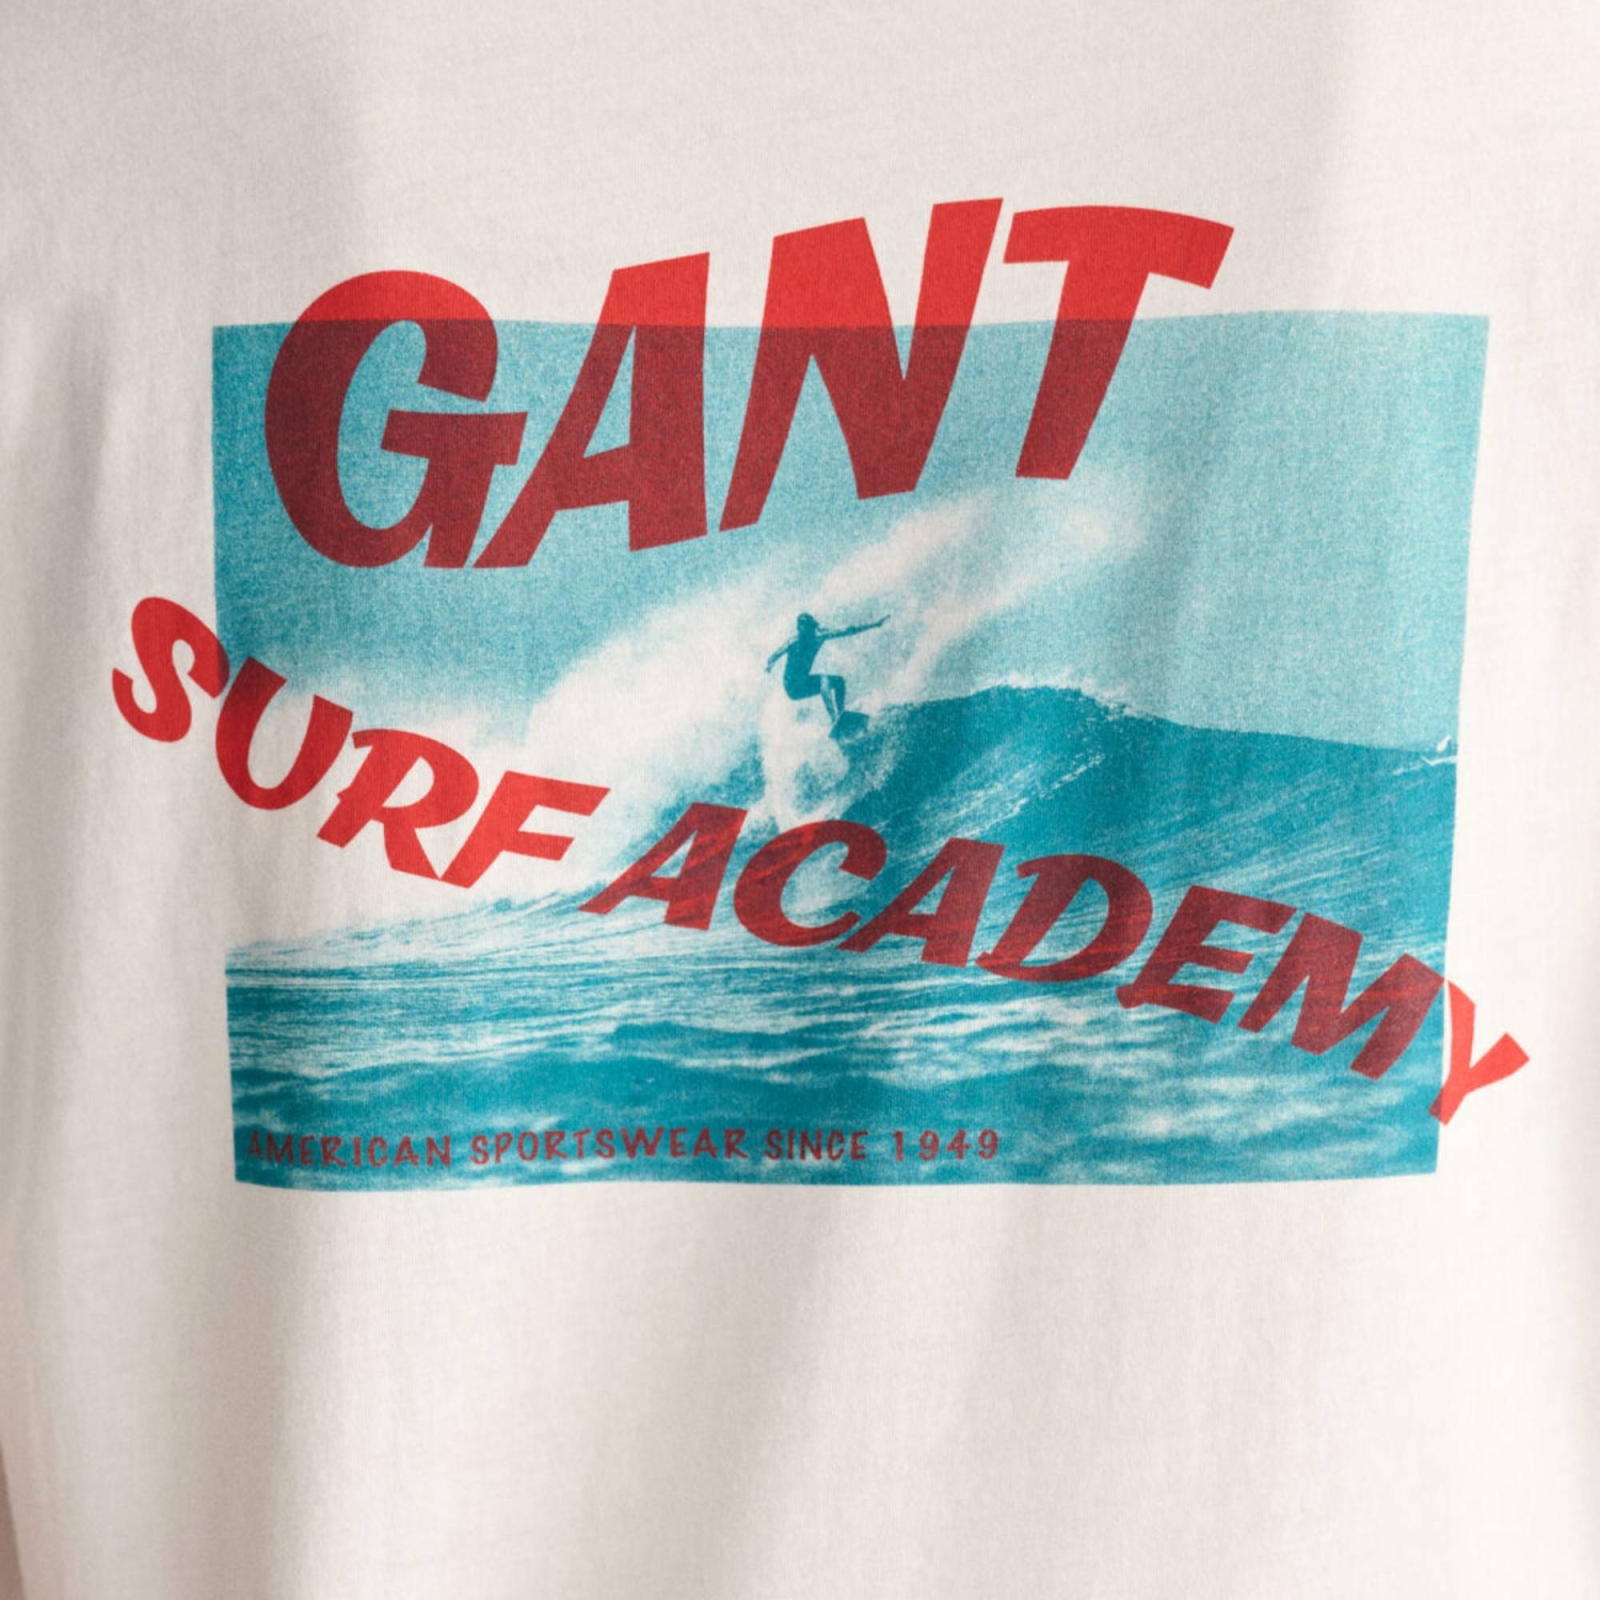 GANT WASHED GRAPHIC SS T-SHIRT